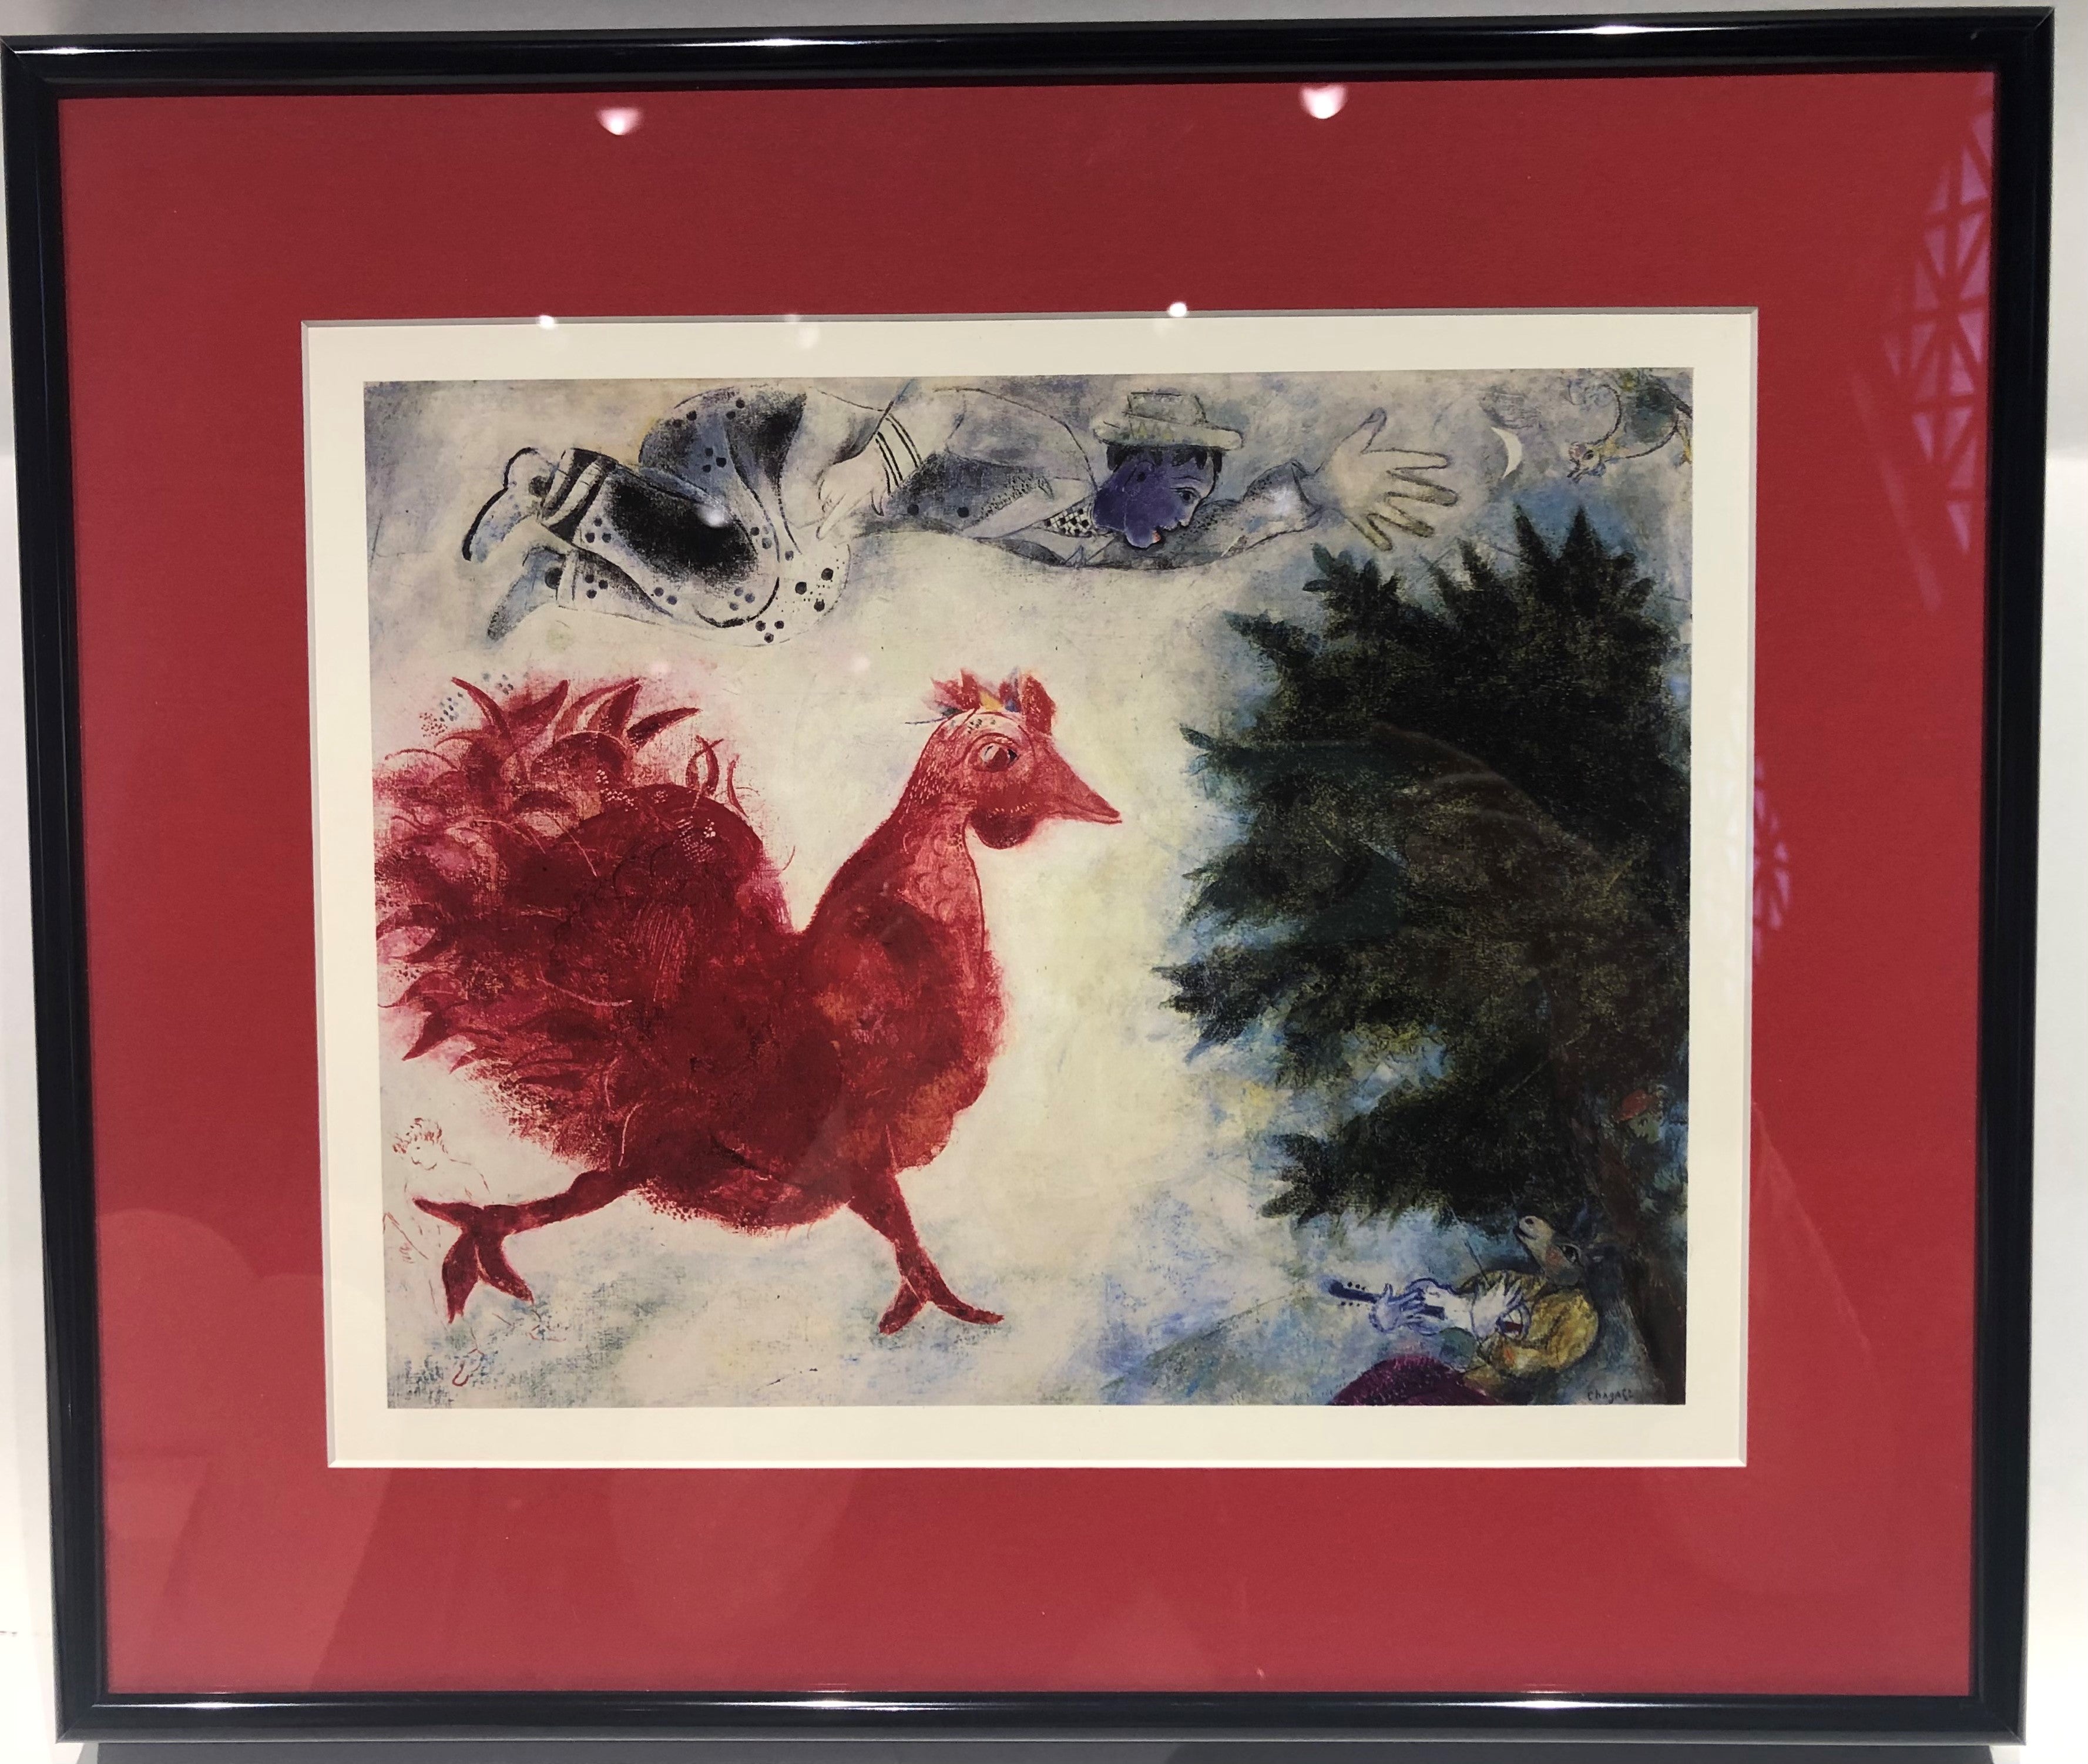 The Red Rooster by Chagall Framed